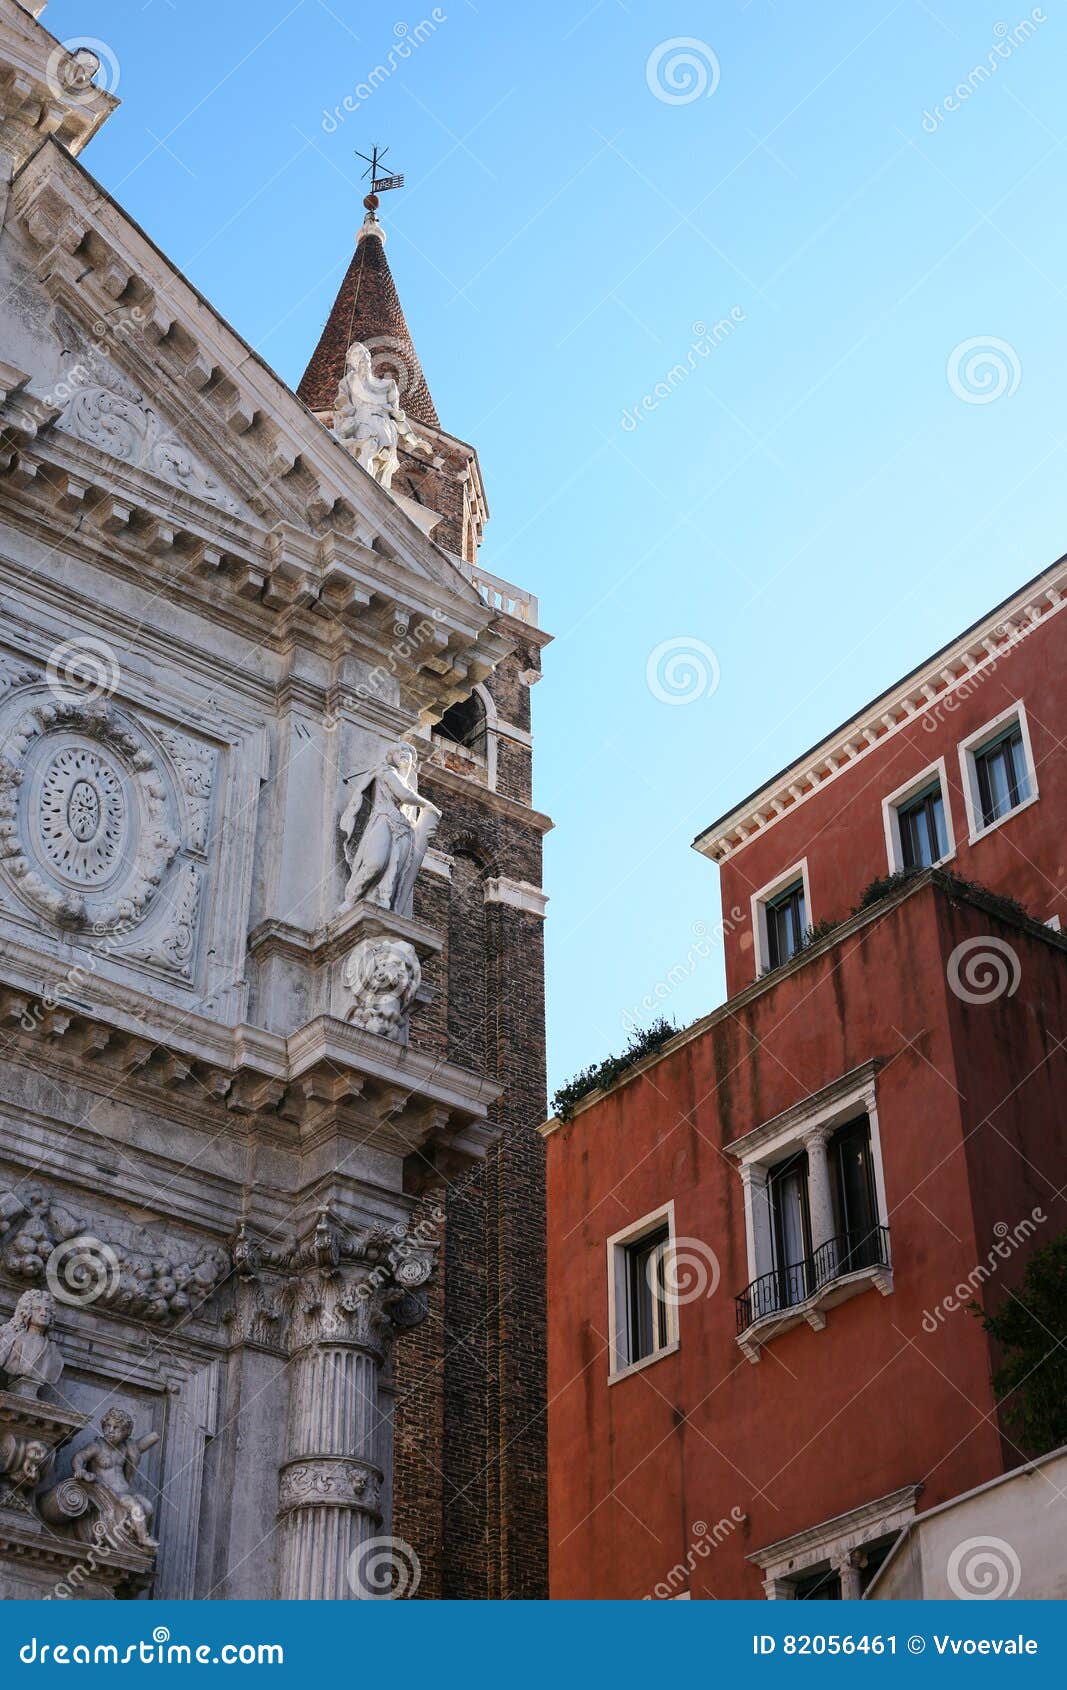 facade of church and house in venice